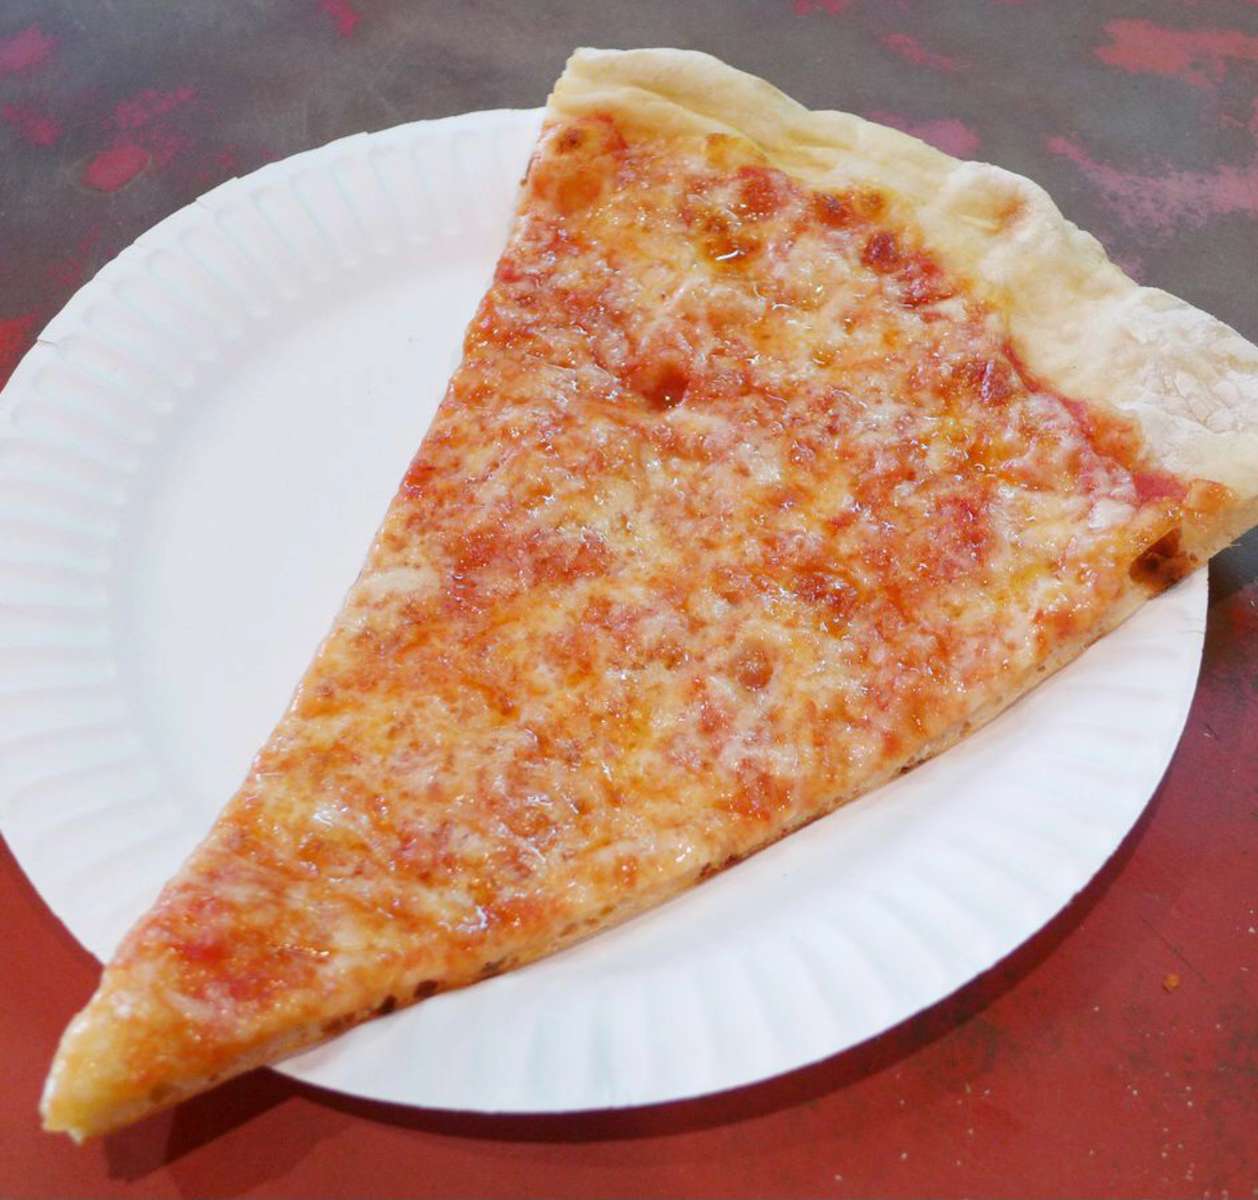 Cheese Pizza Slice❤️❤️❤️❤️❤️❤️ jigsaw puzzle online